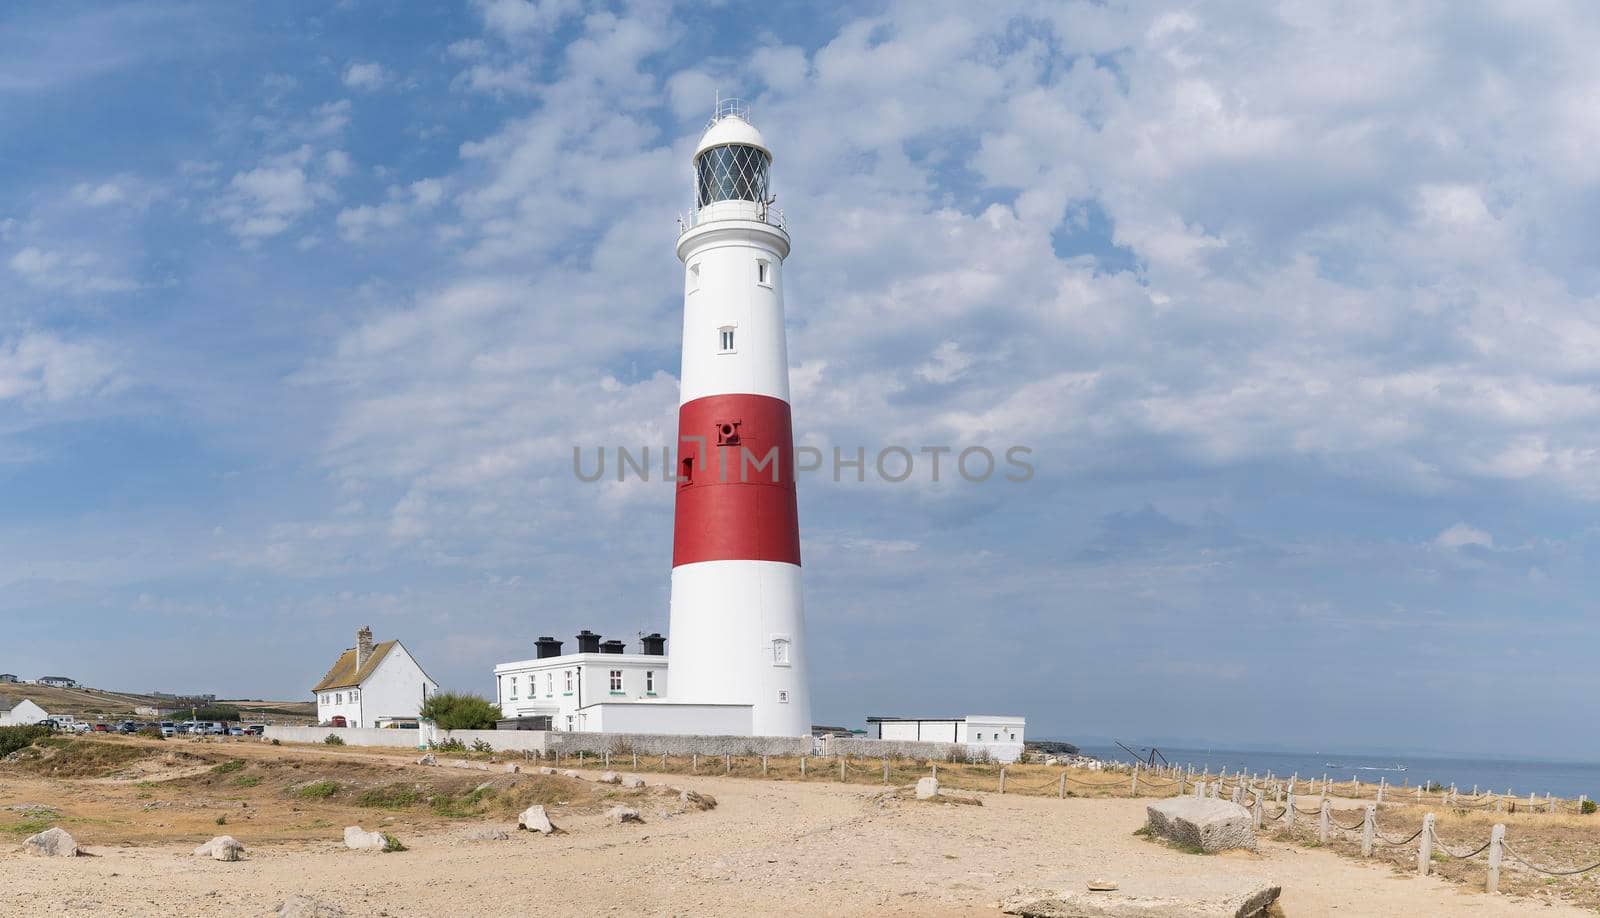 a Panoramic view of the Isle of Portland bill lighthouse near Weymouth Dorset coast England UK with a cloudy sky and the ocean in the summer